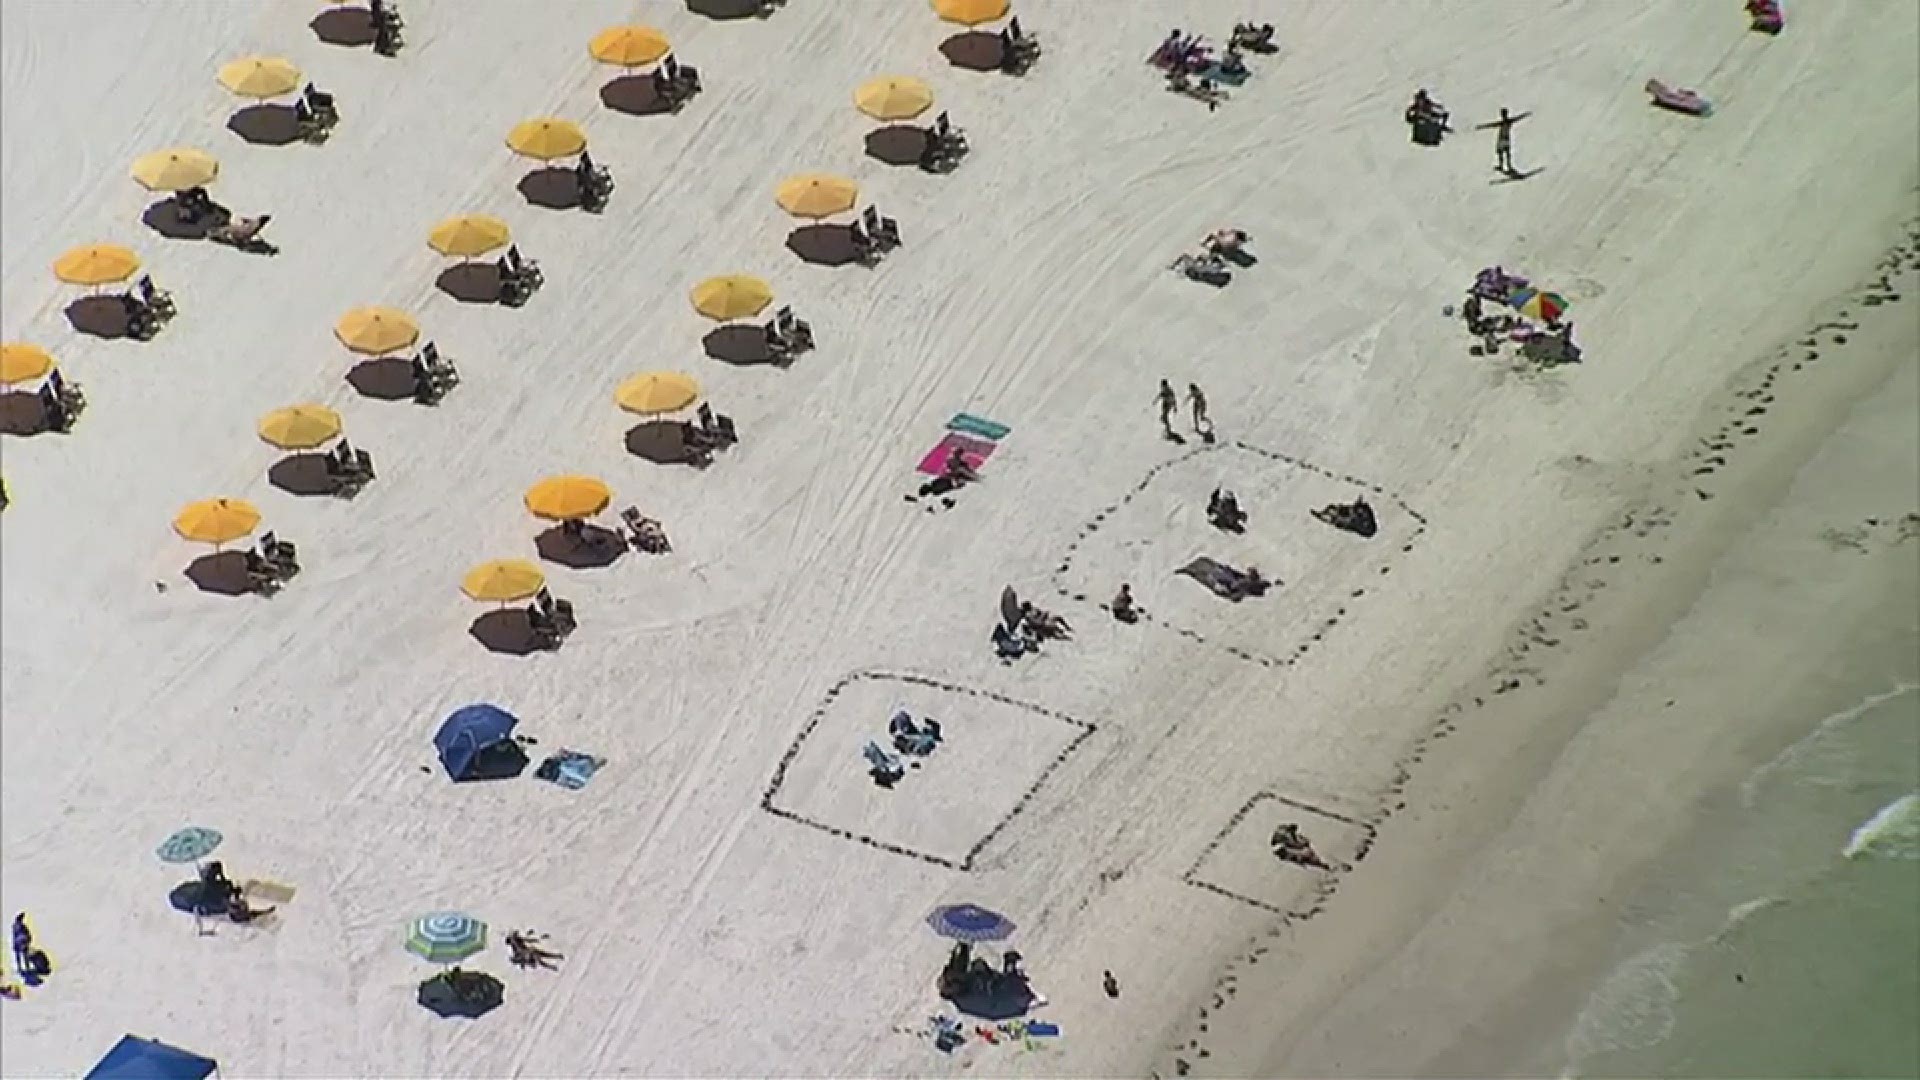 Pinellas County beaches reopened Monday, May 4, and it was clear many people were itching to get back on the sand.